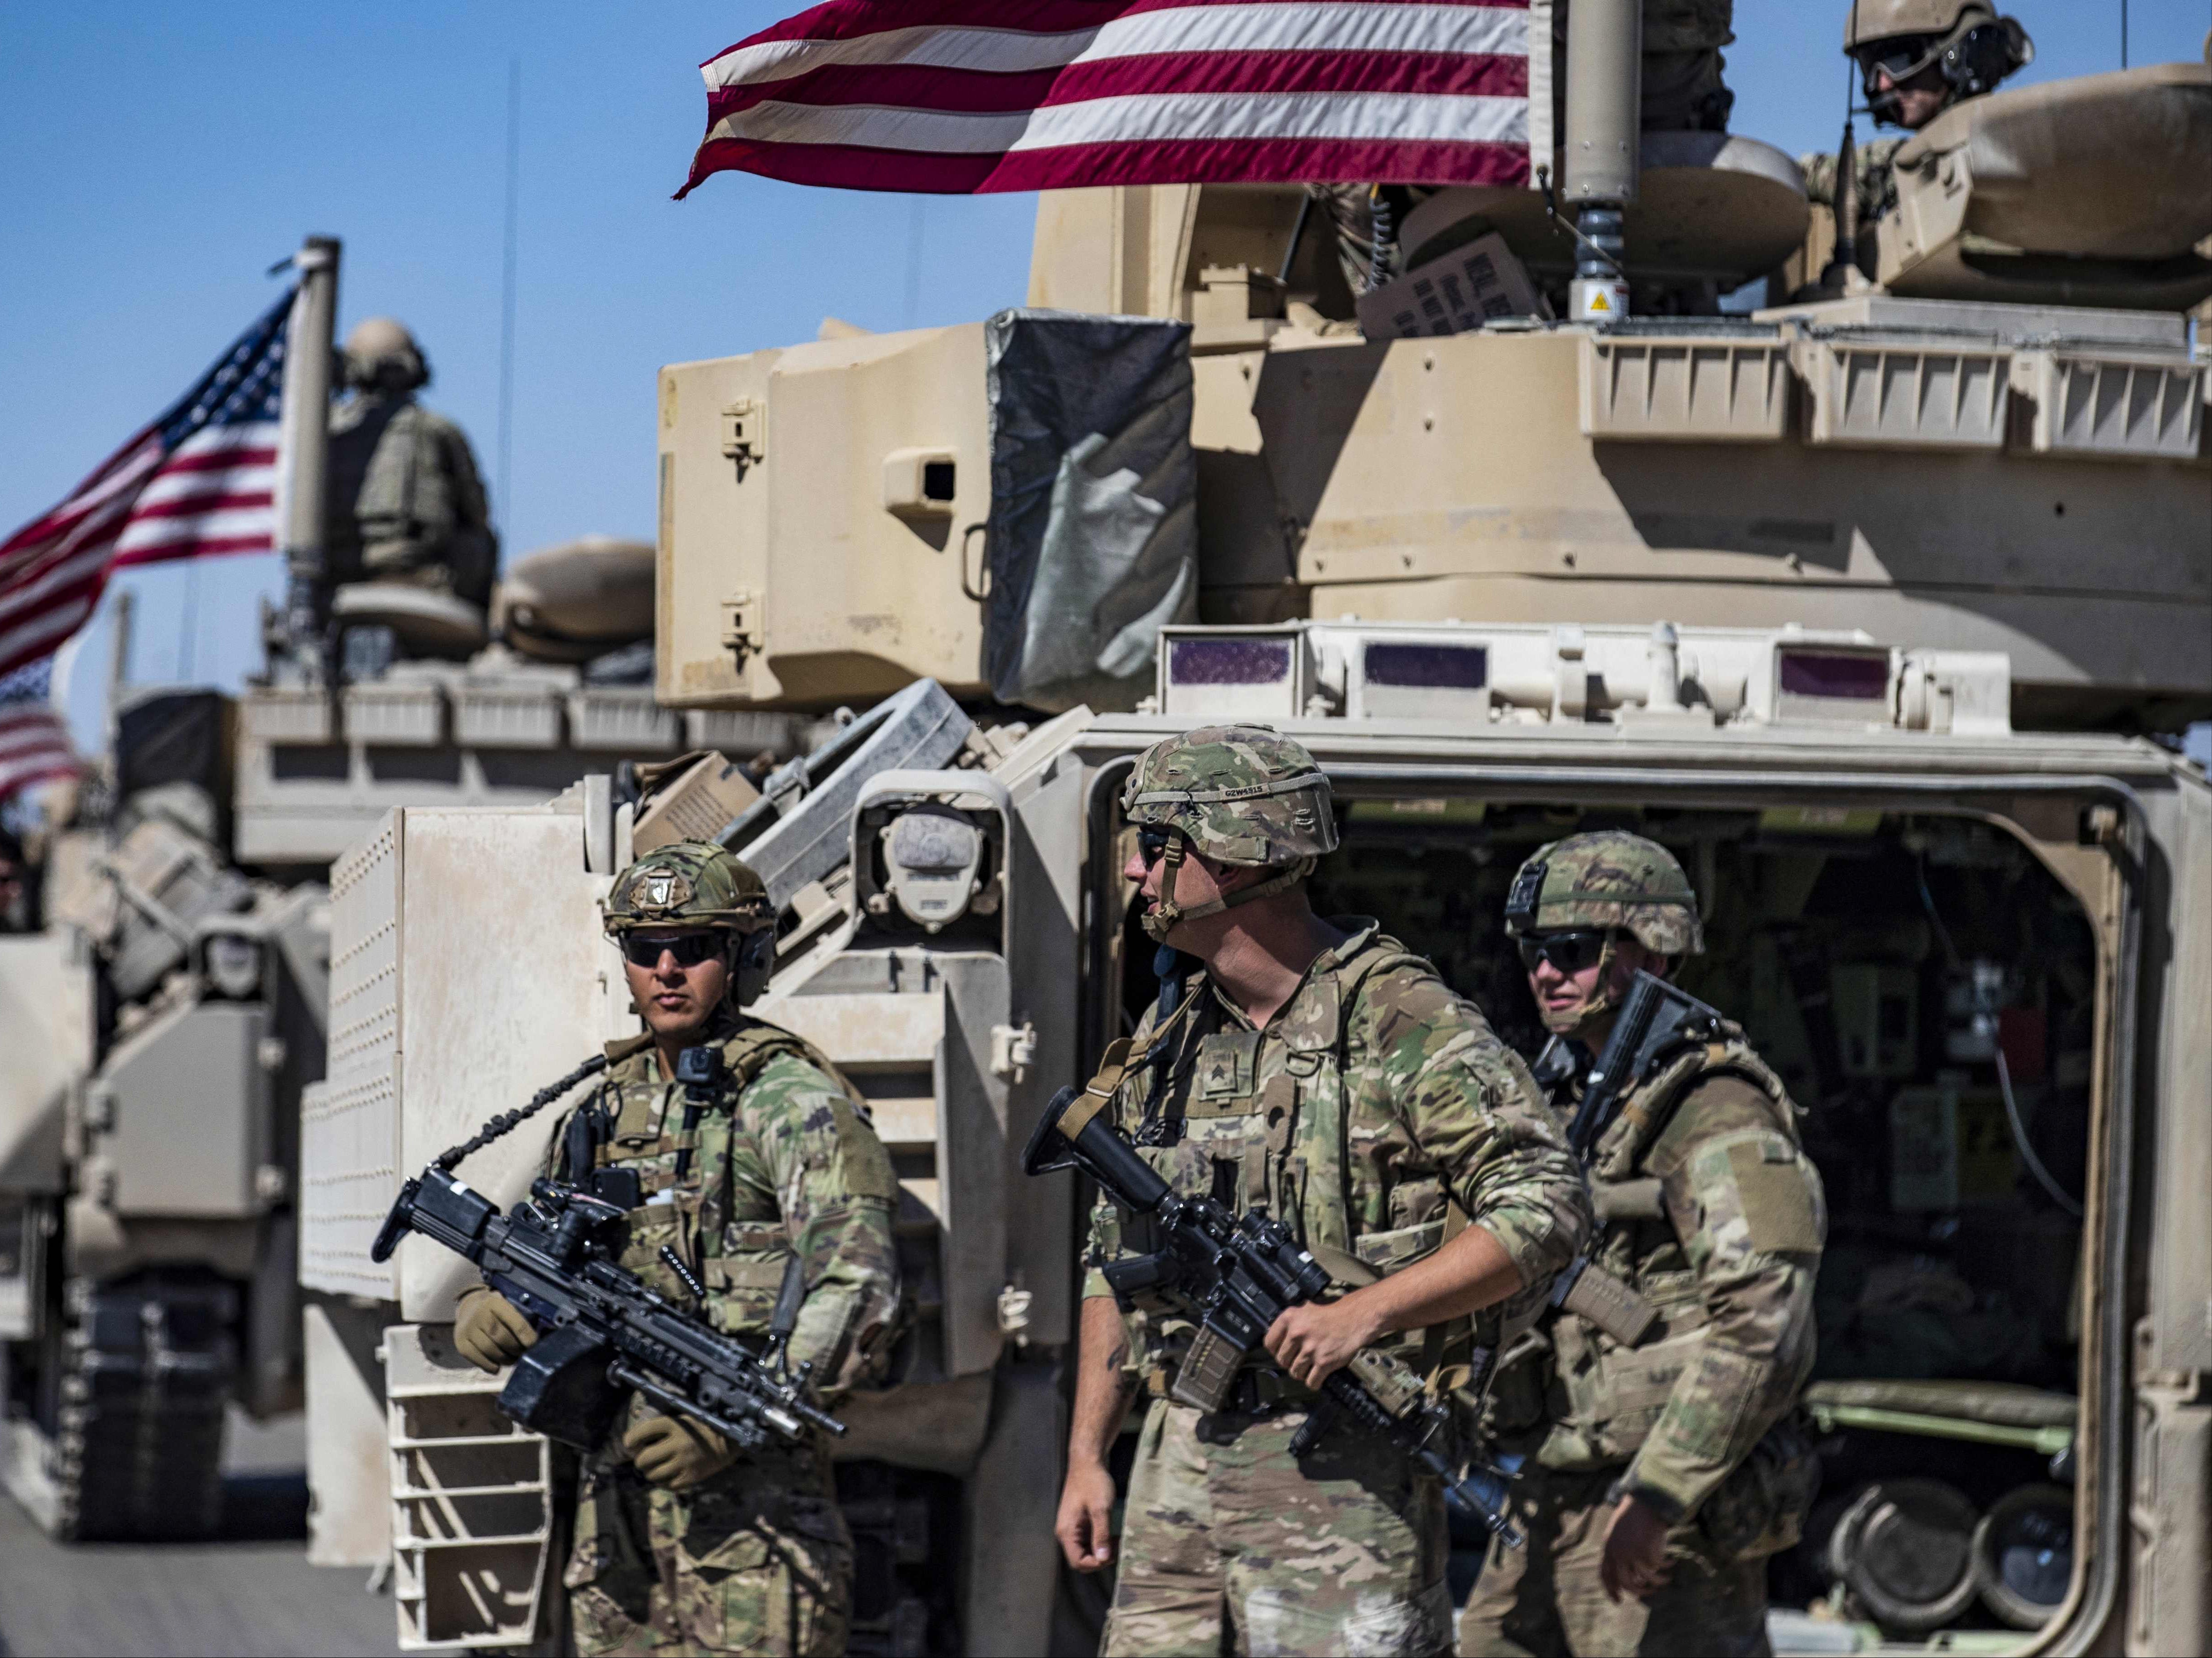 US forces have been stationed in Syria since 2013